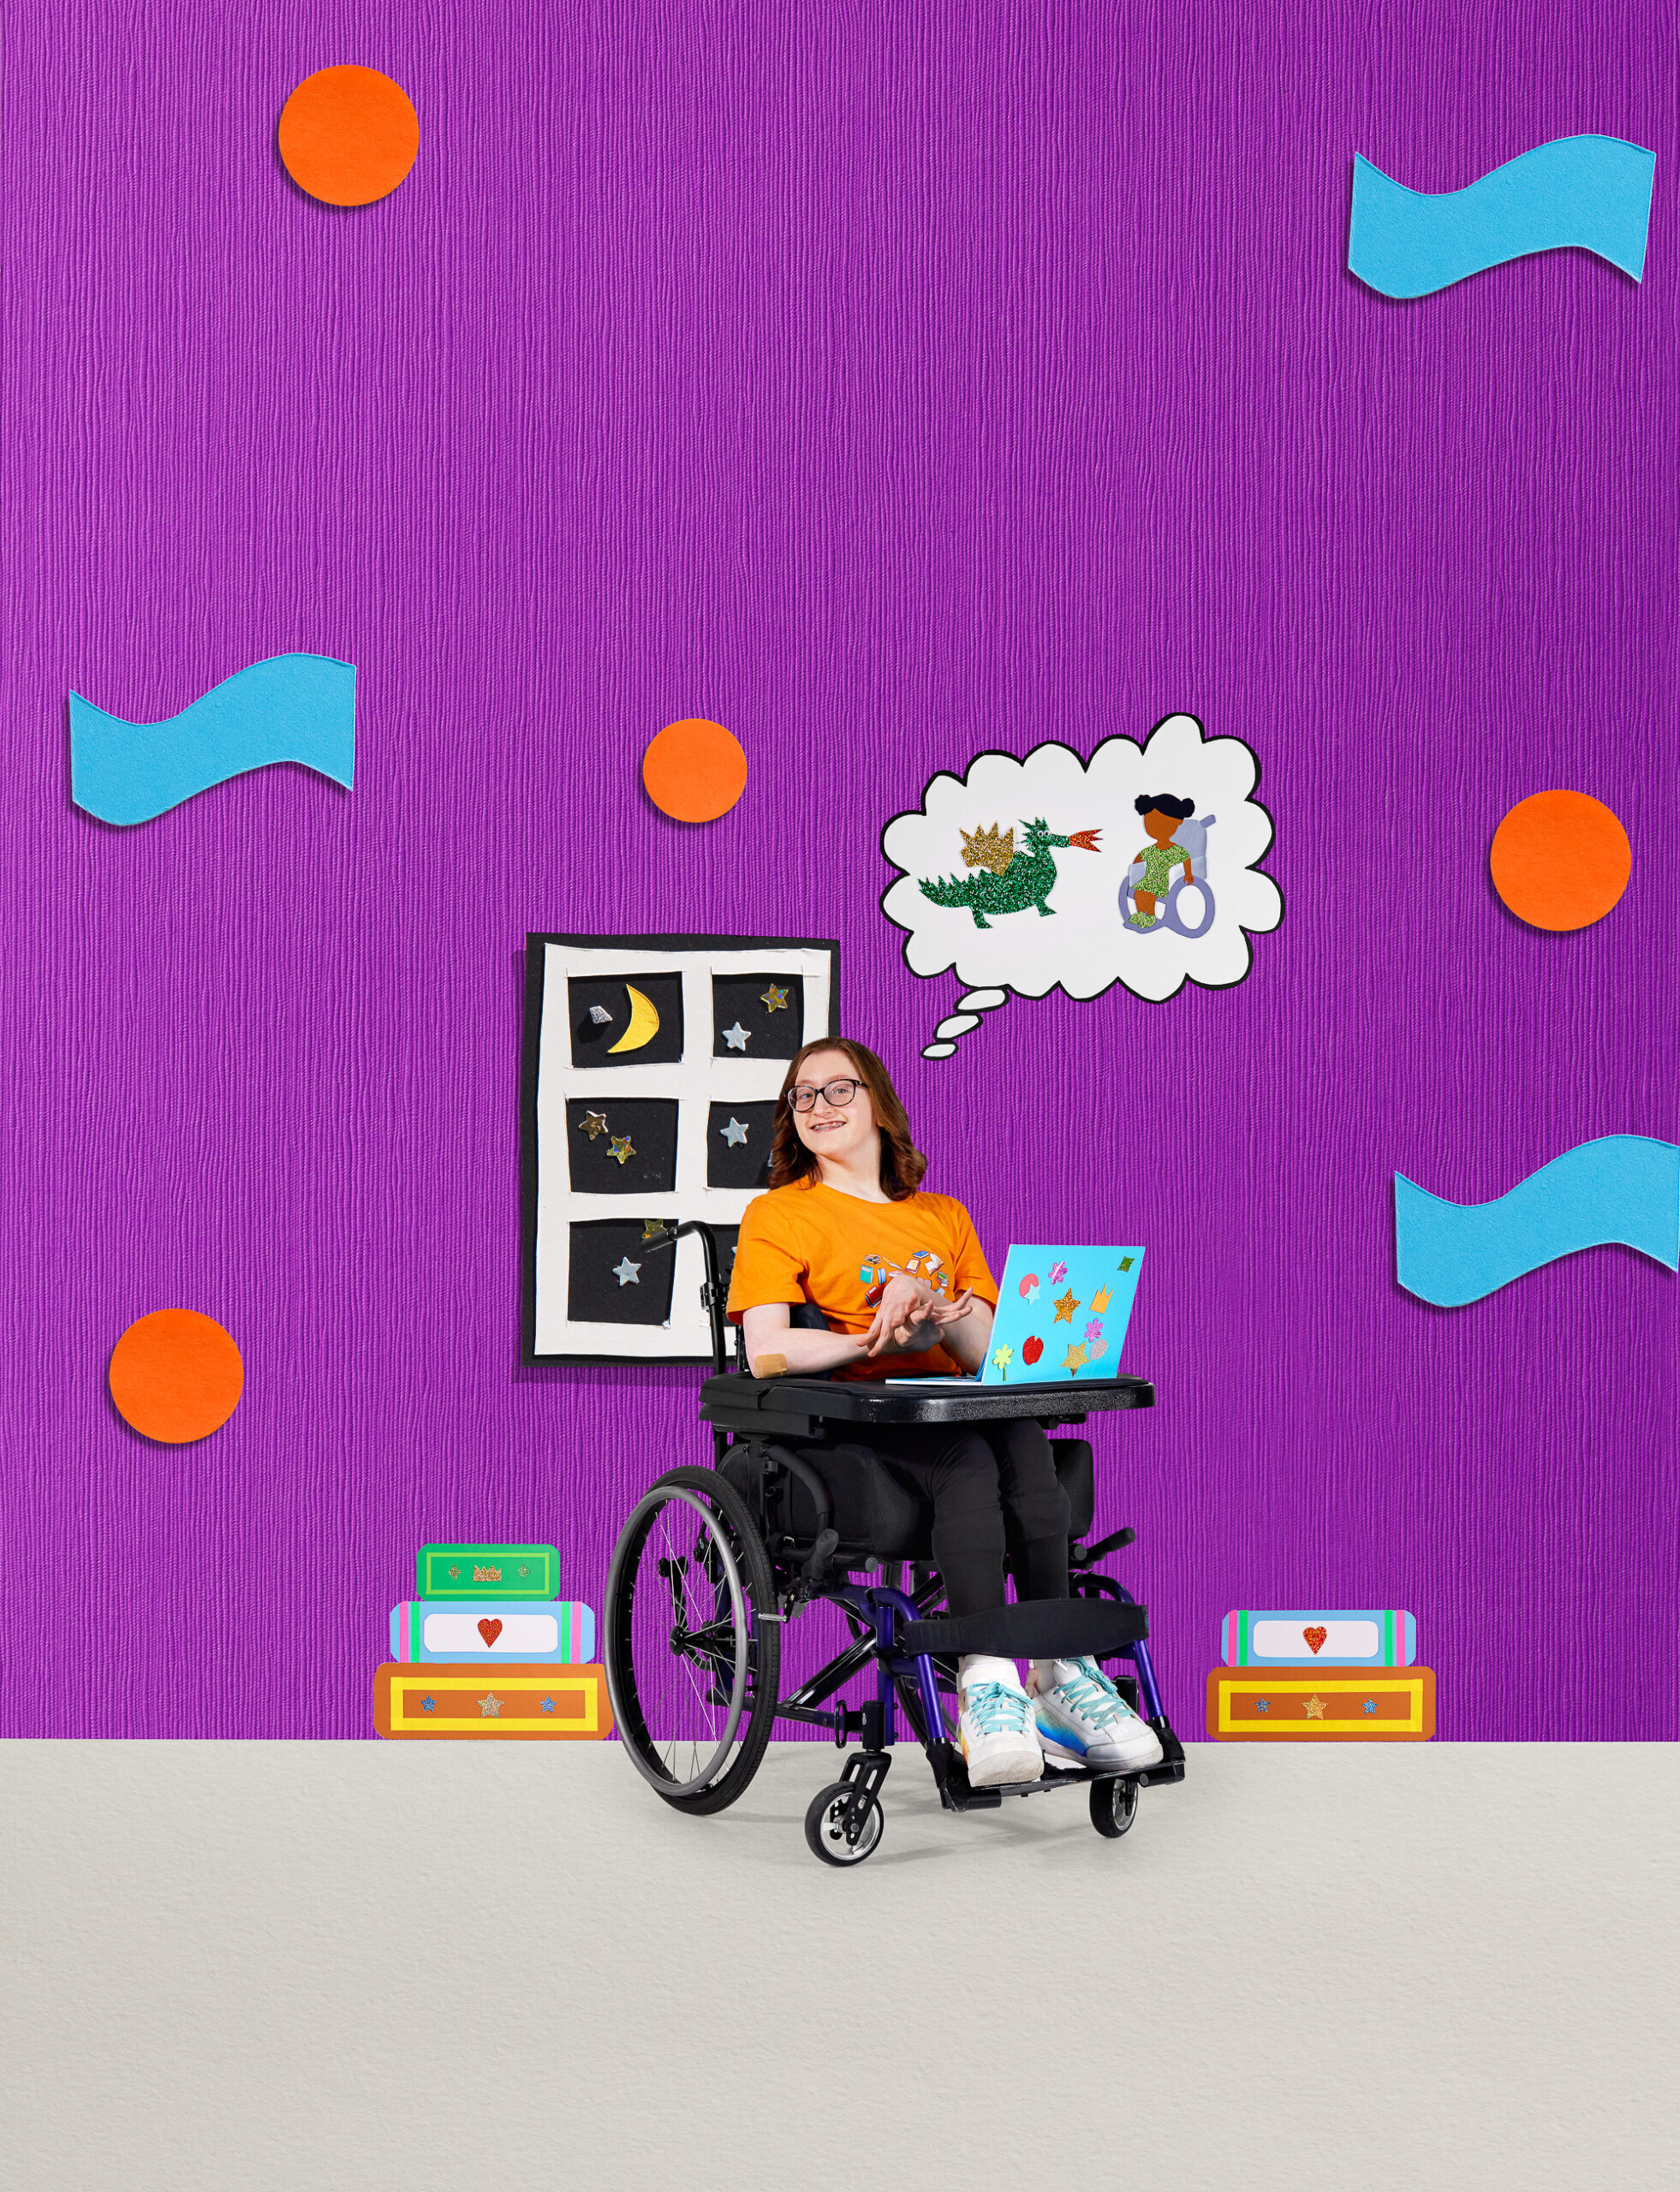 A young person with light skin tone and medium brown hair. She is using a wheelchair and writing on her laptop. A thought bubble appears above her head, featuring a character in a wheelchair and a dragon.